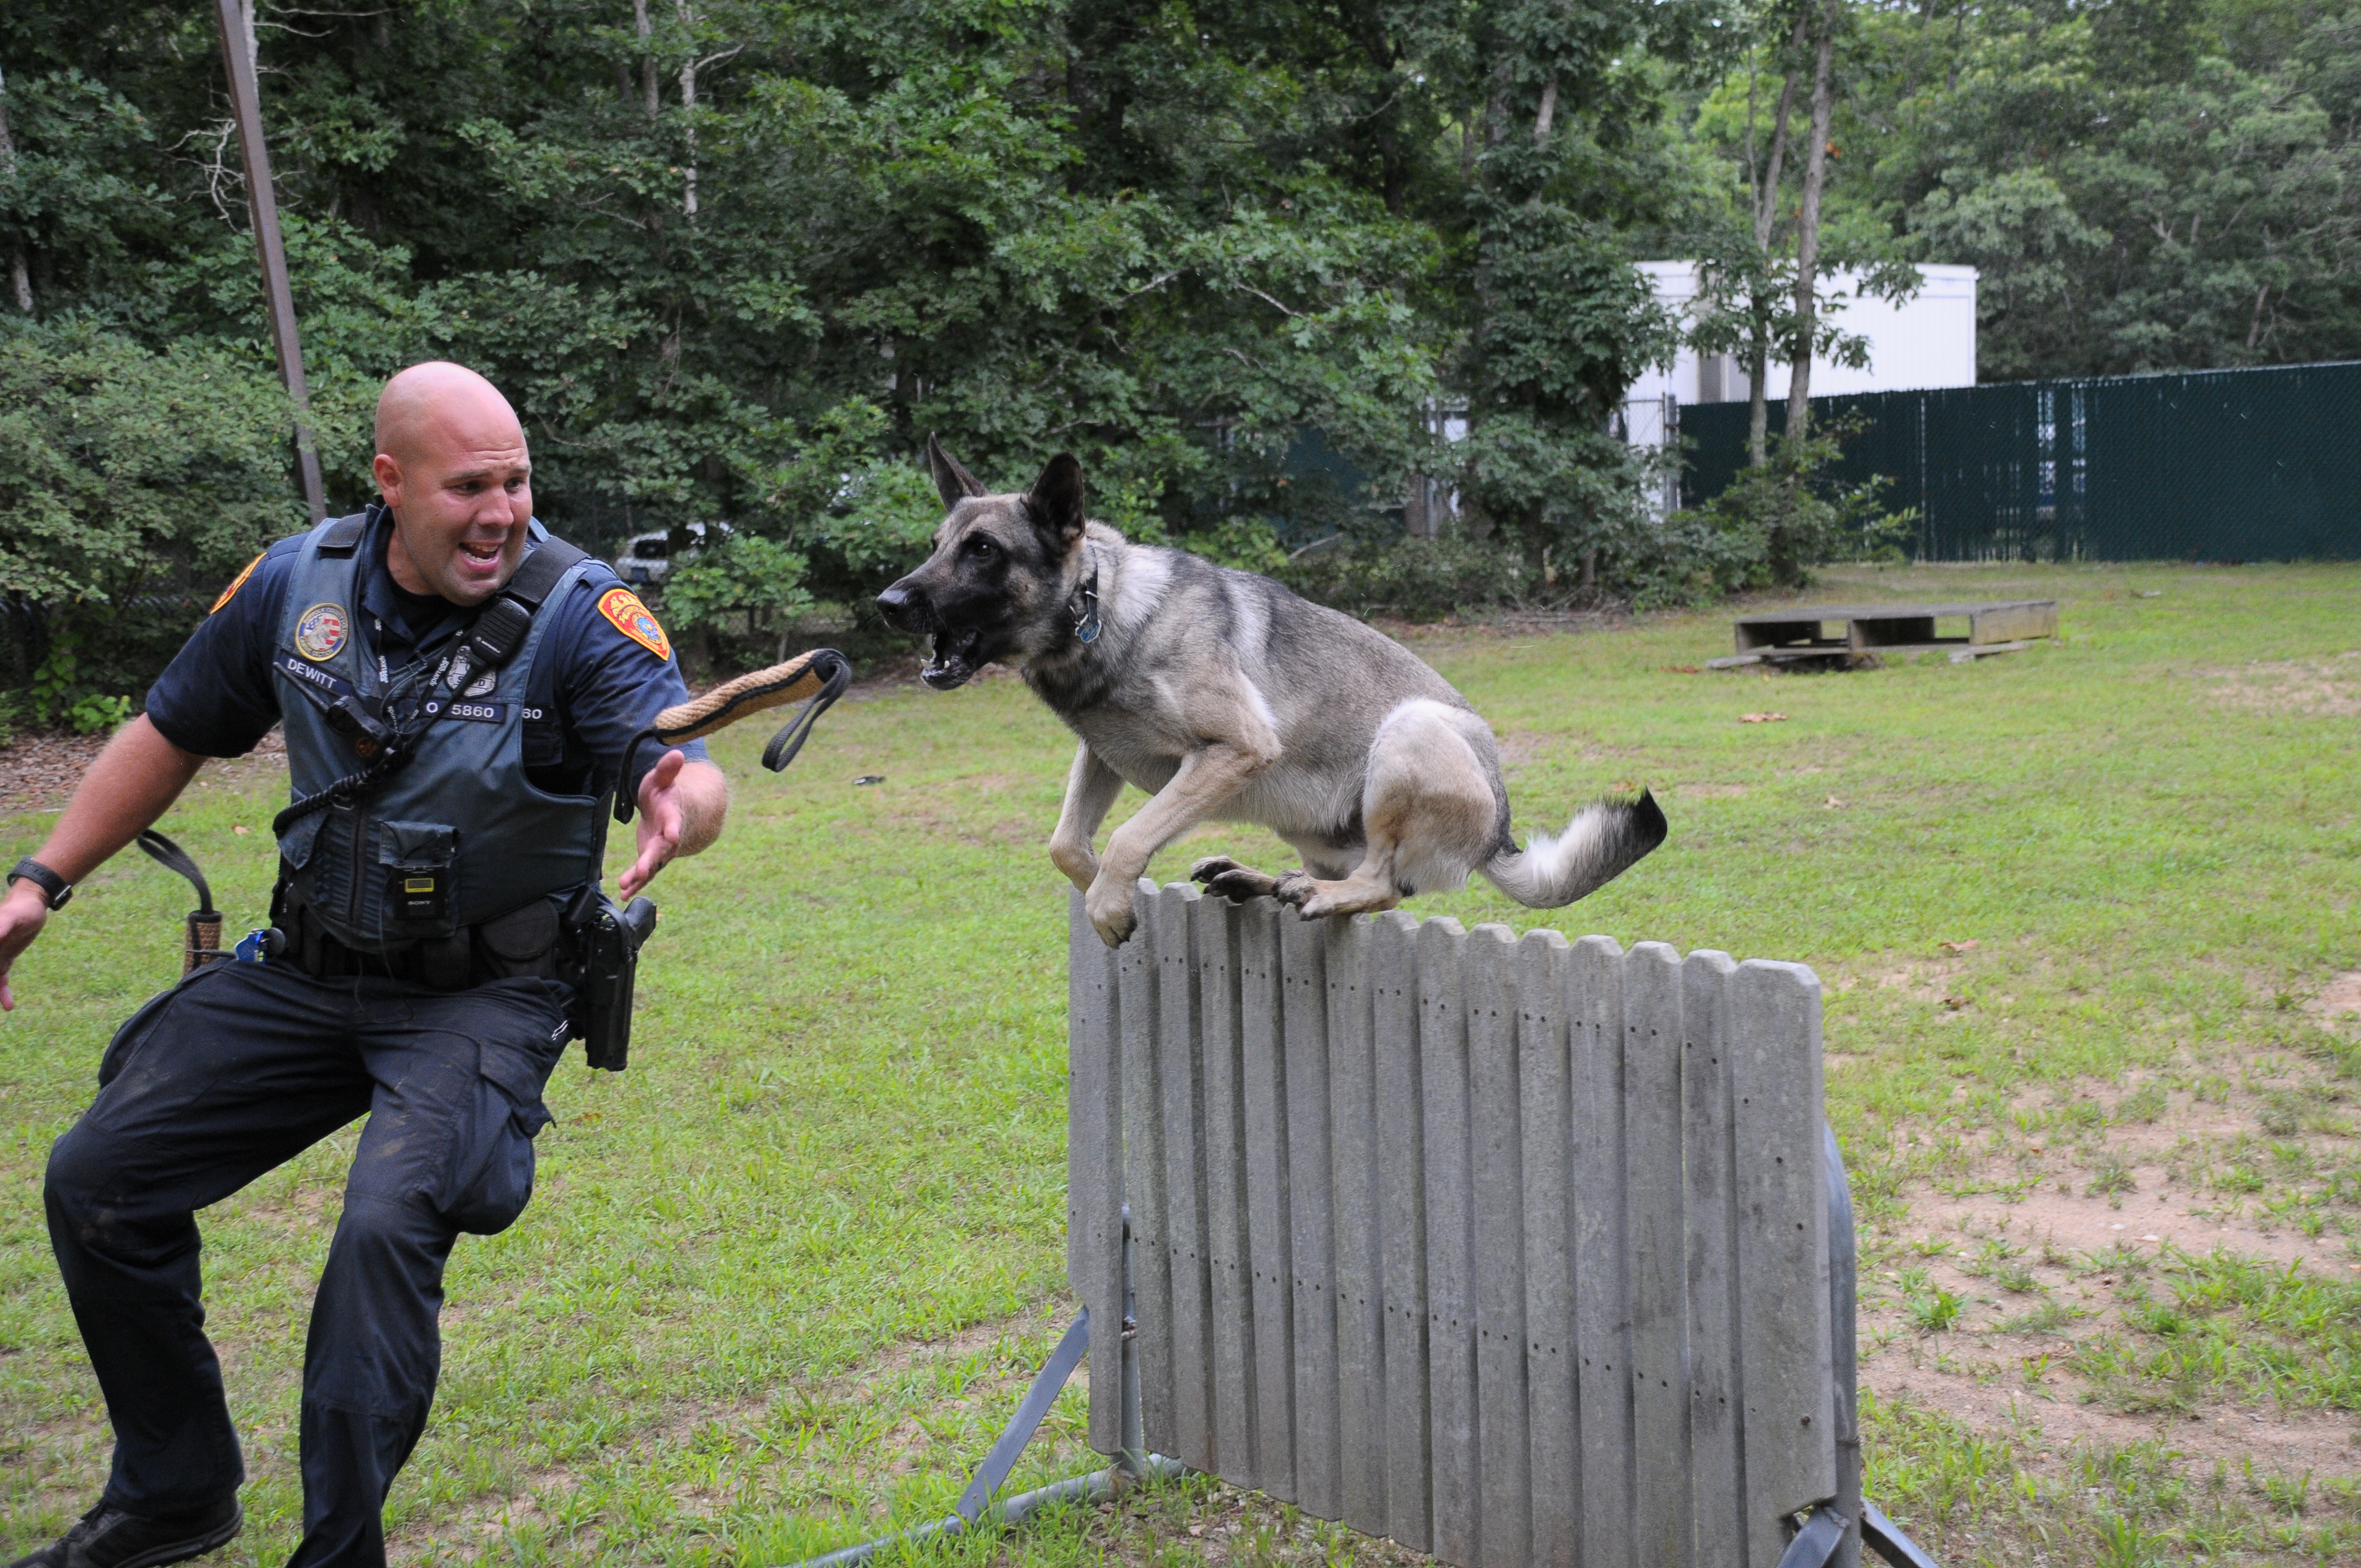 a police officer training a canine on an obstacle course